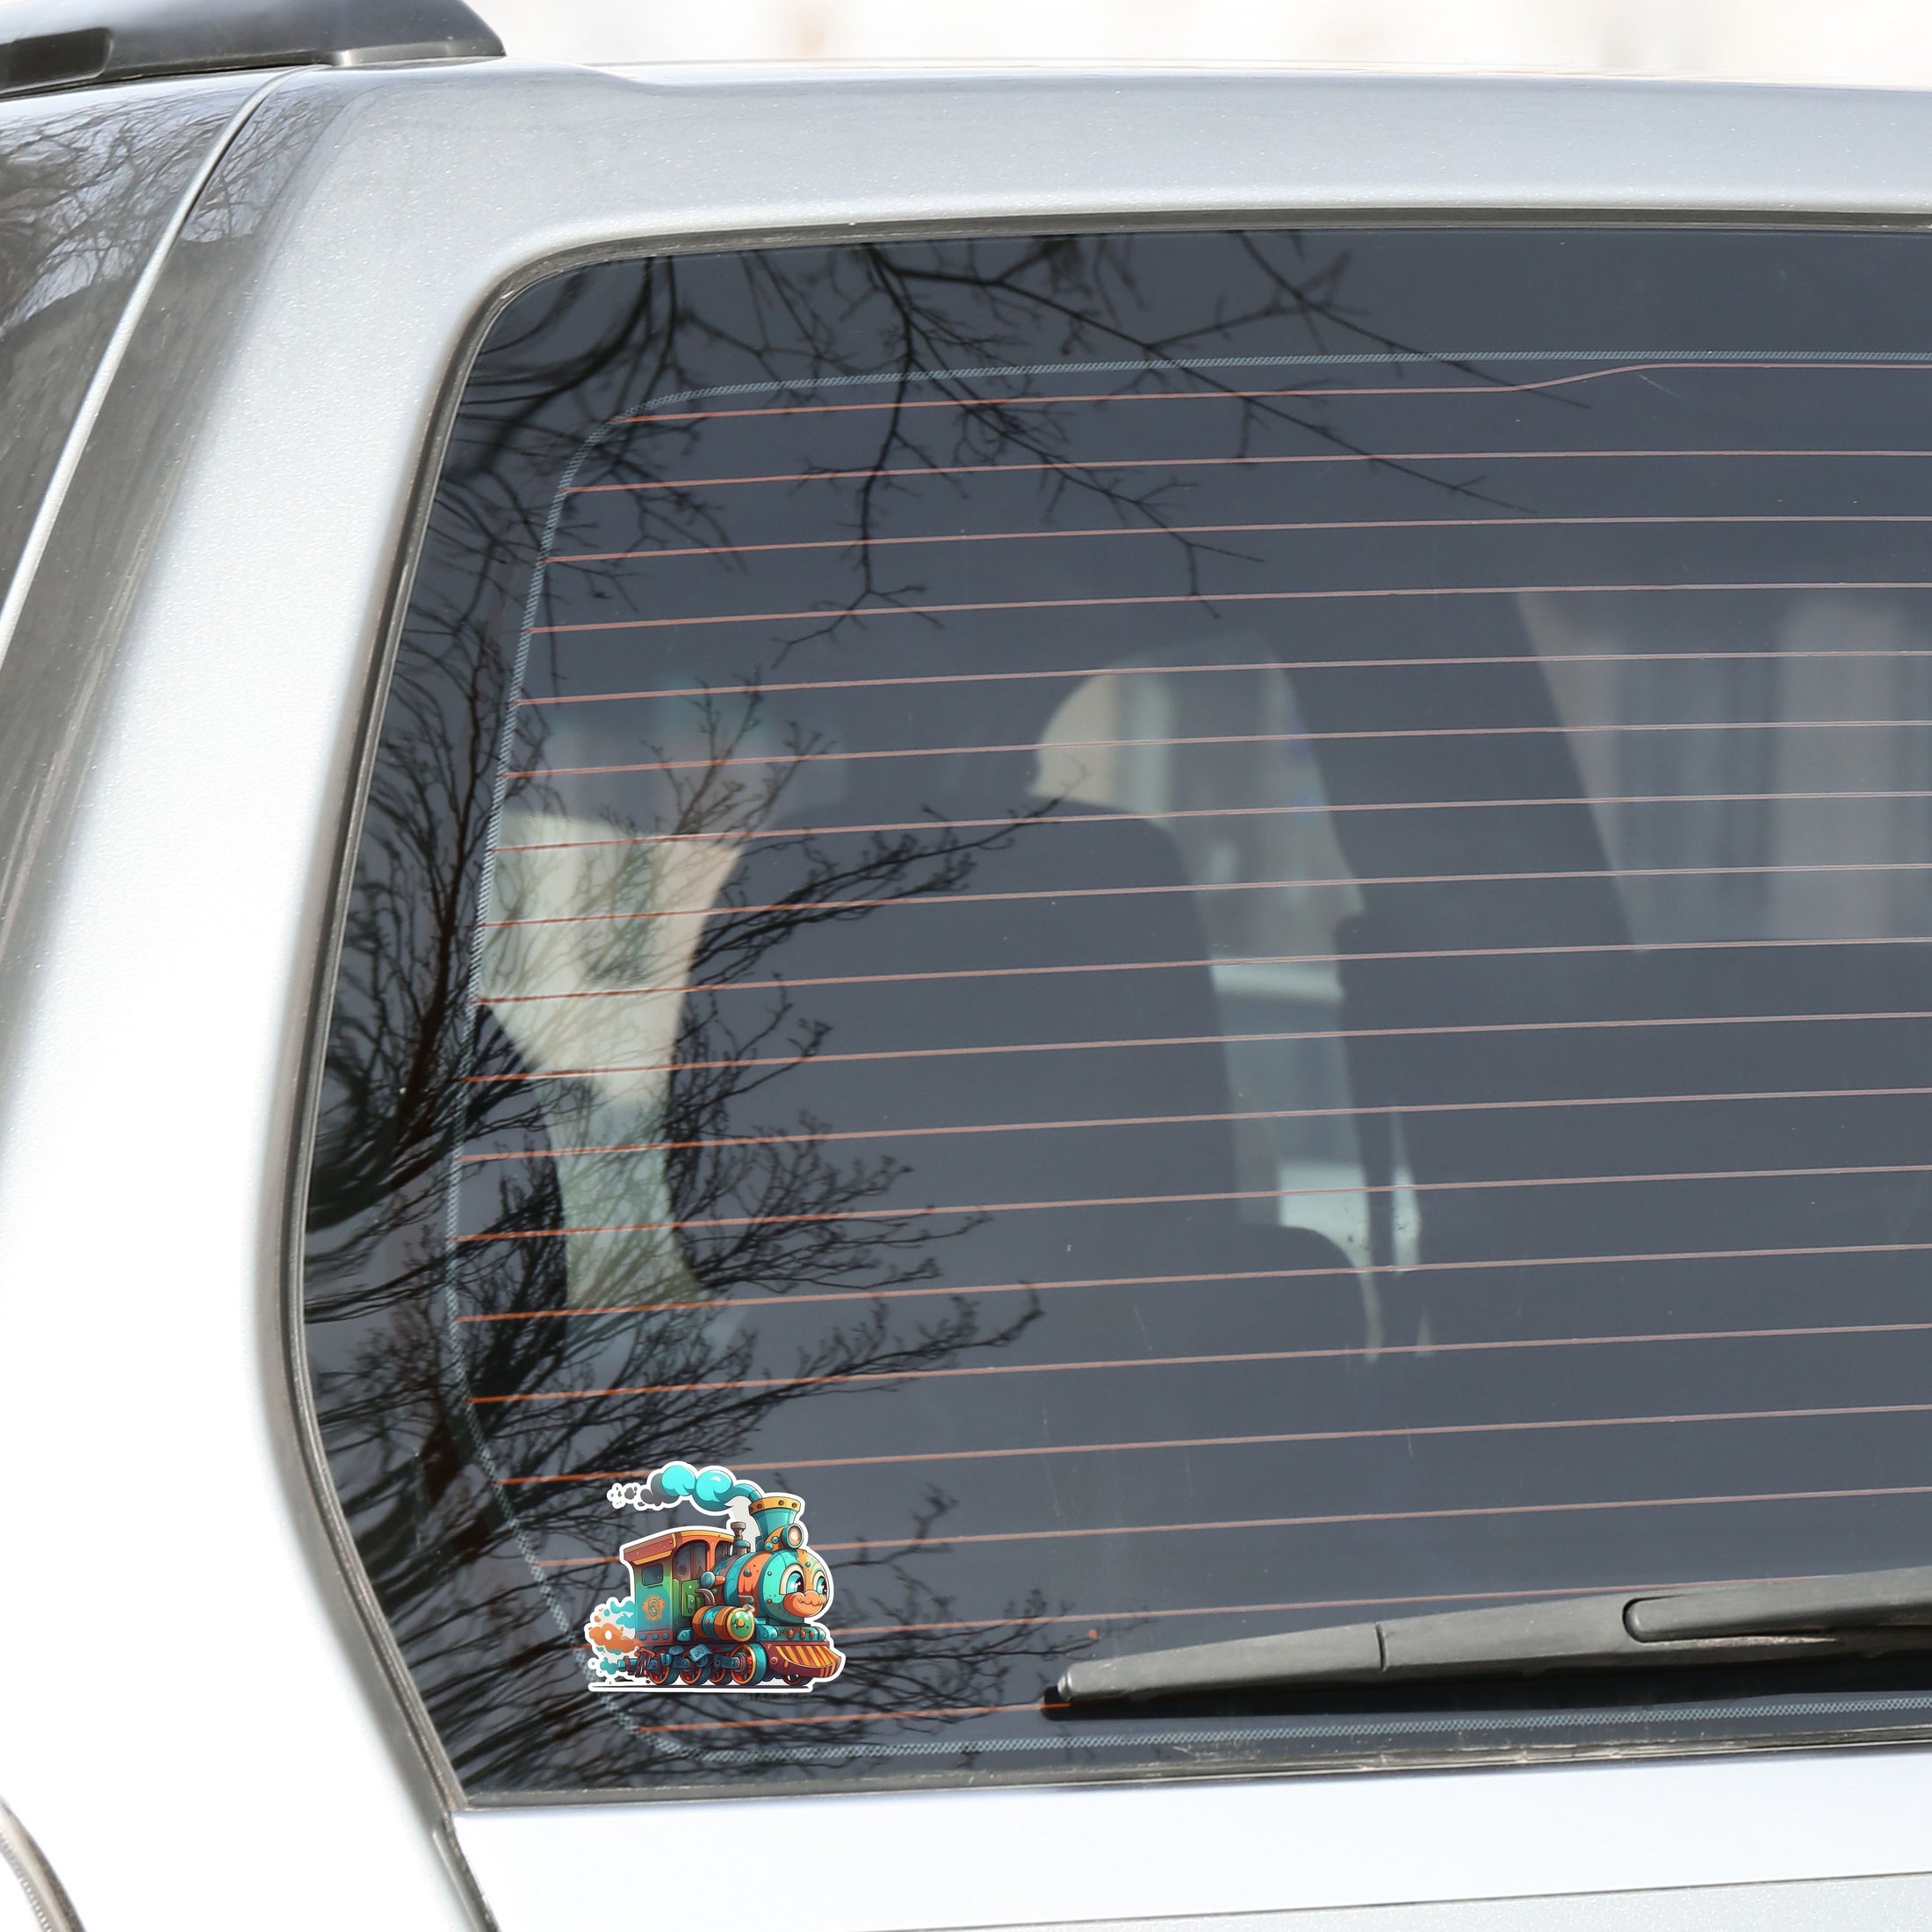 This image shows the toy train sticker on the back window of a car.